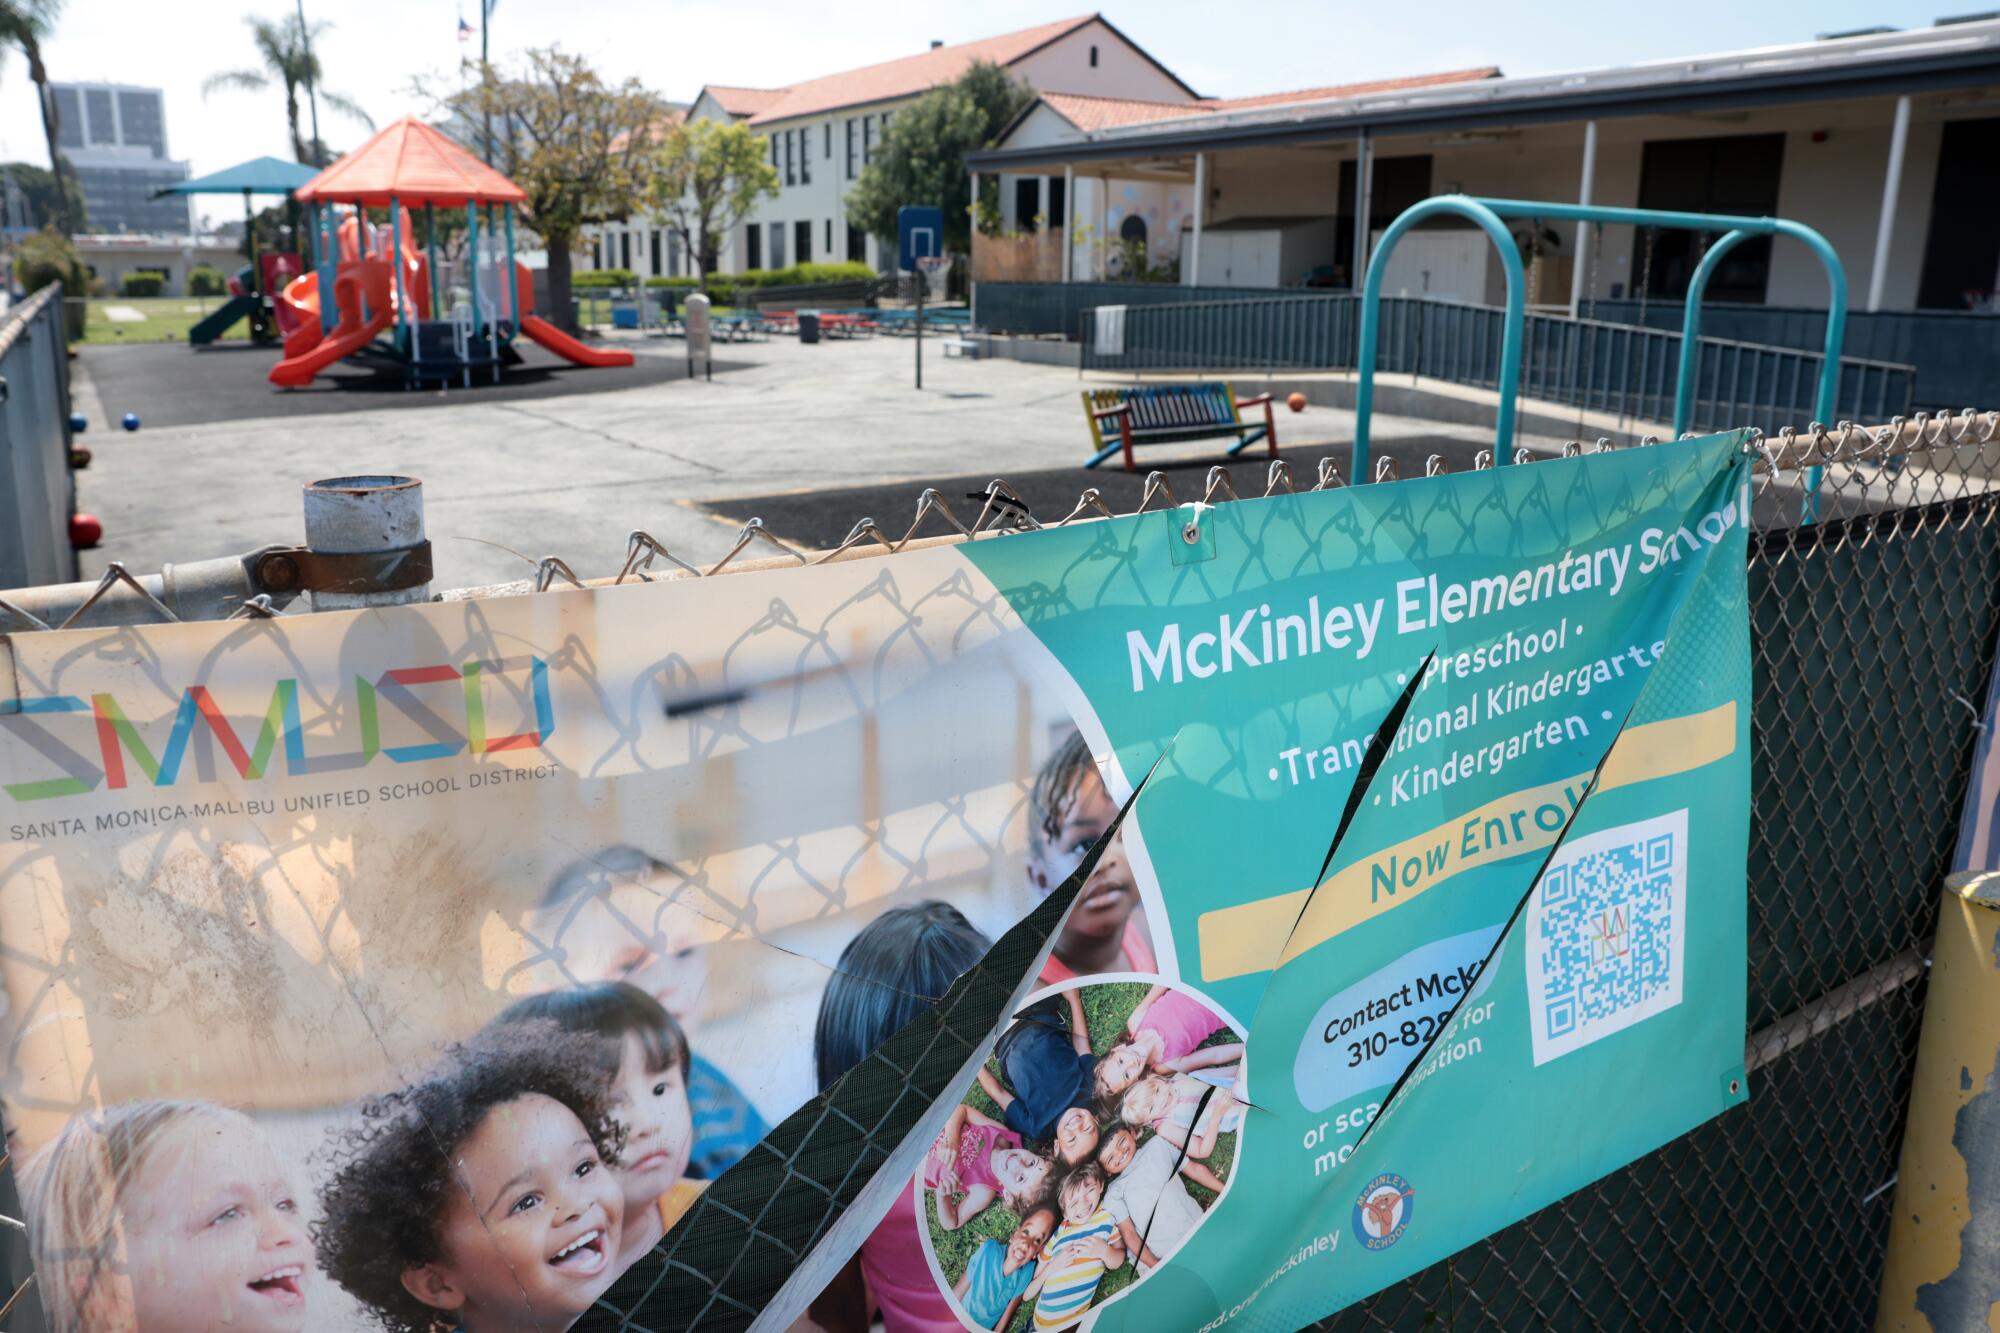 A view of the McKinley Elementary School playground